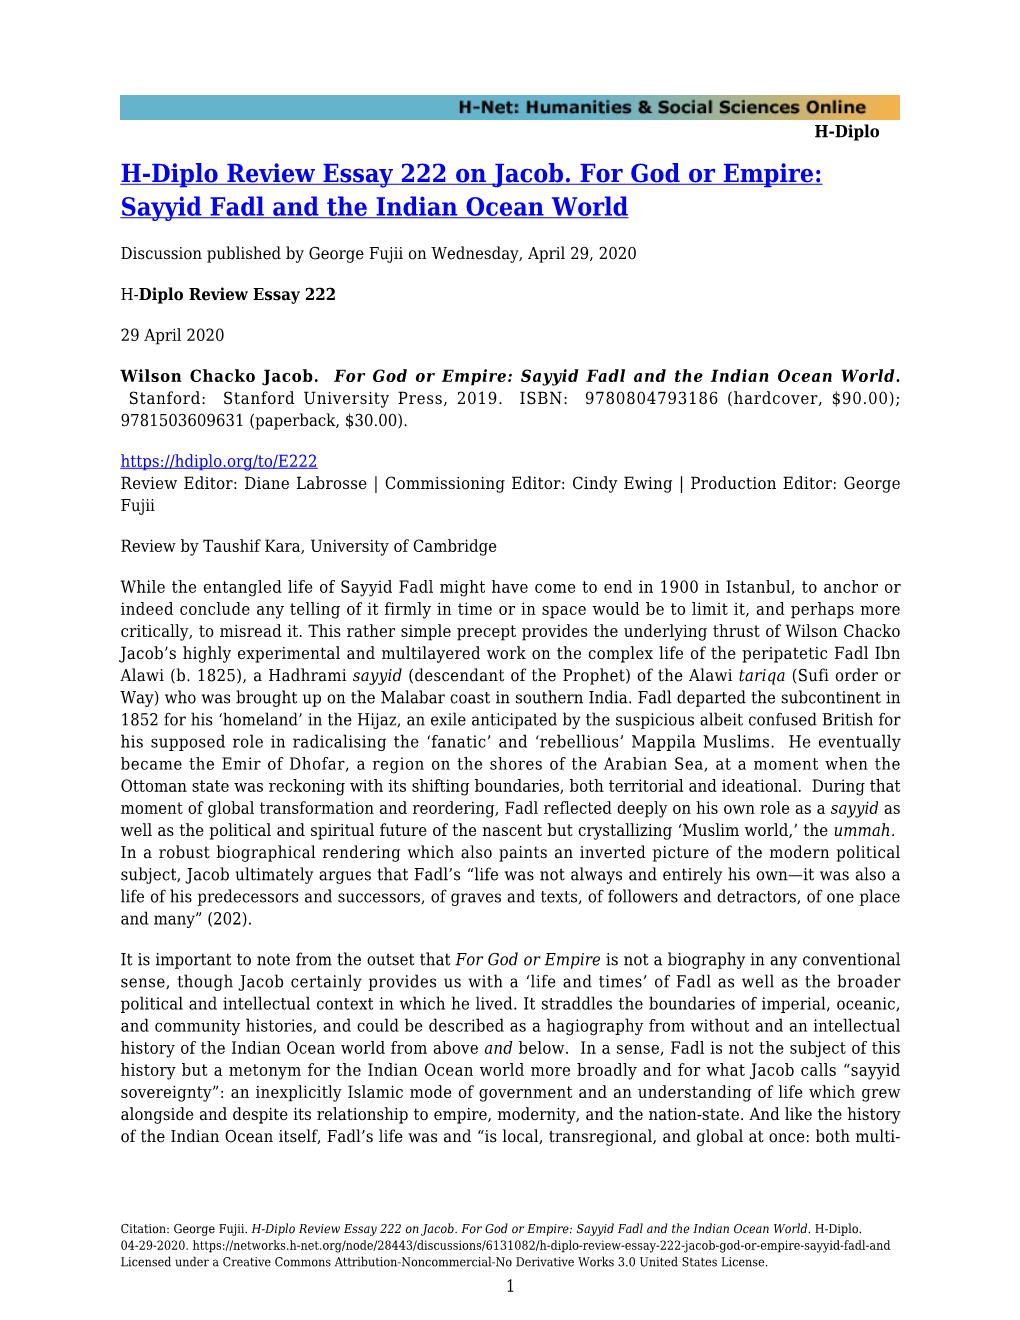 H-Diplo Review Essay 222 on Jacob. for God Or Empire: Sayyid Fadl and the Indian Ocean World